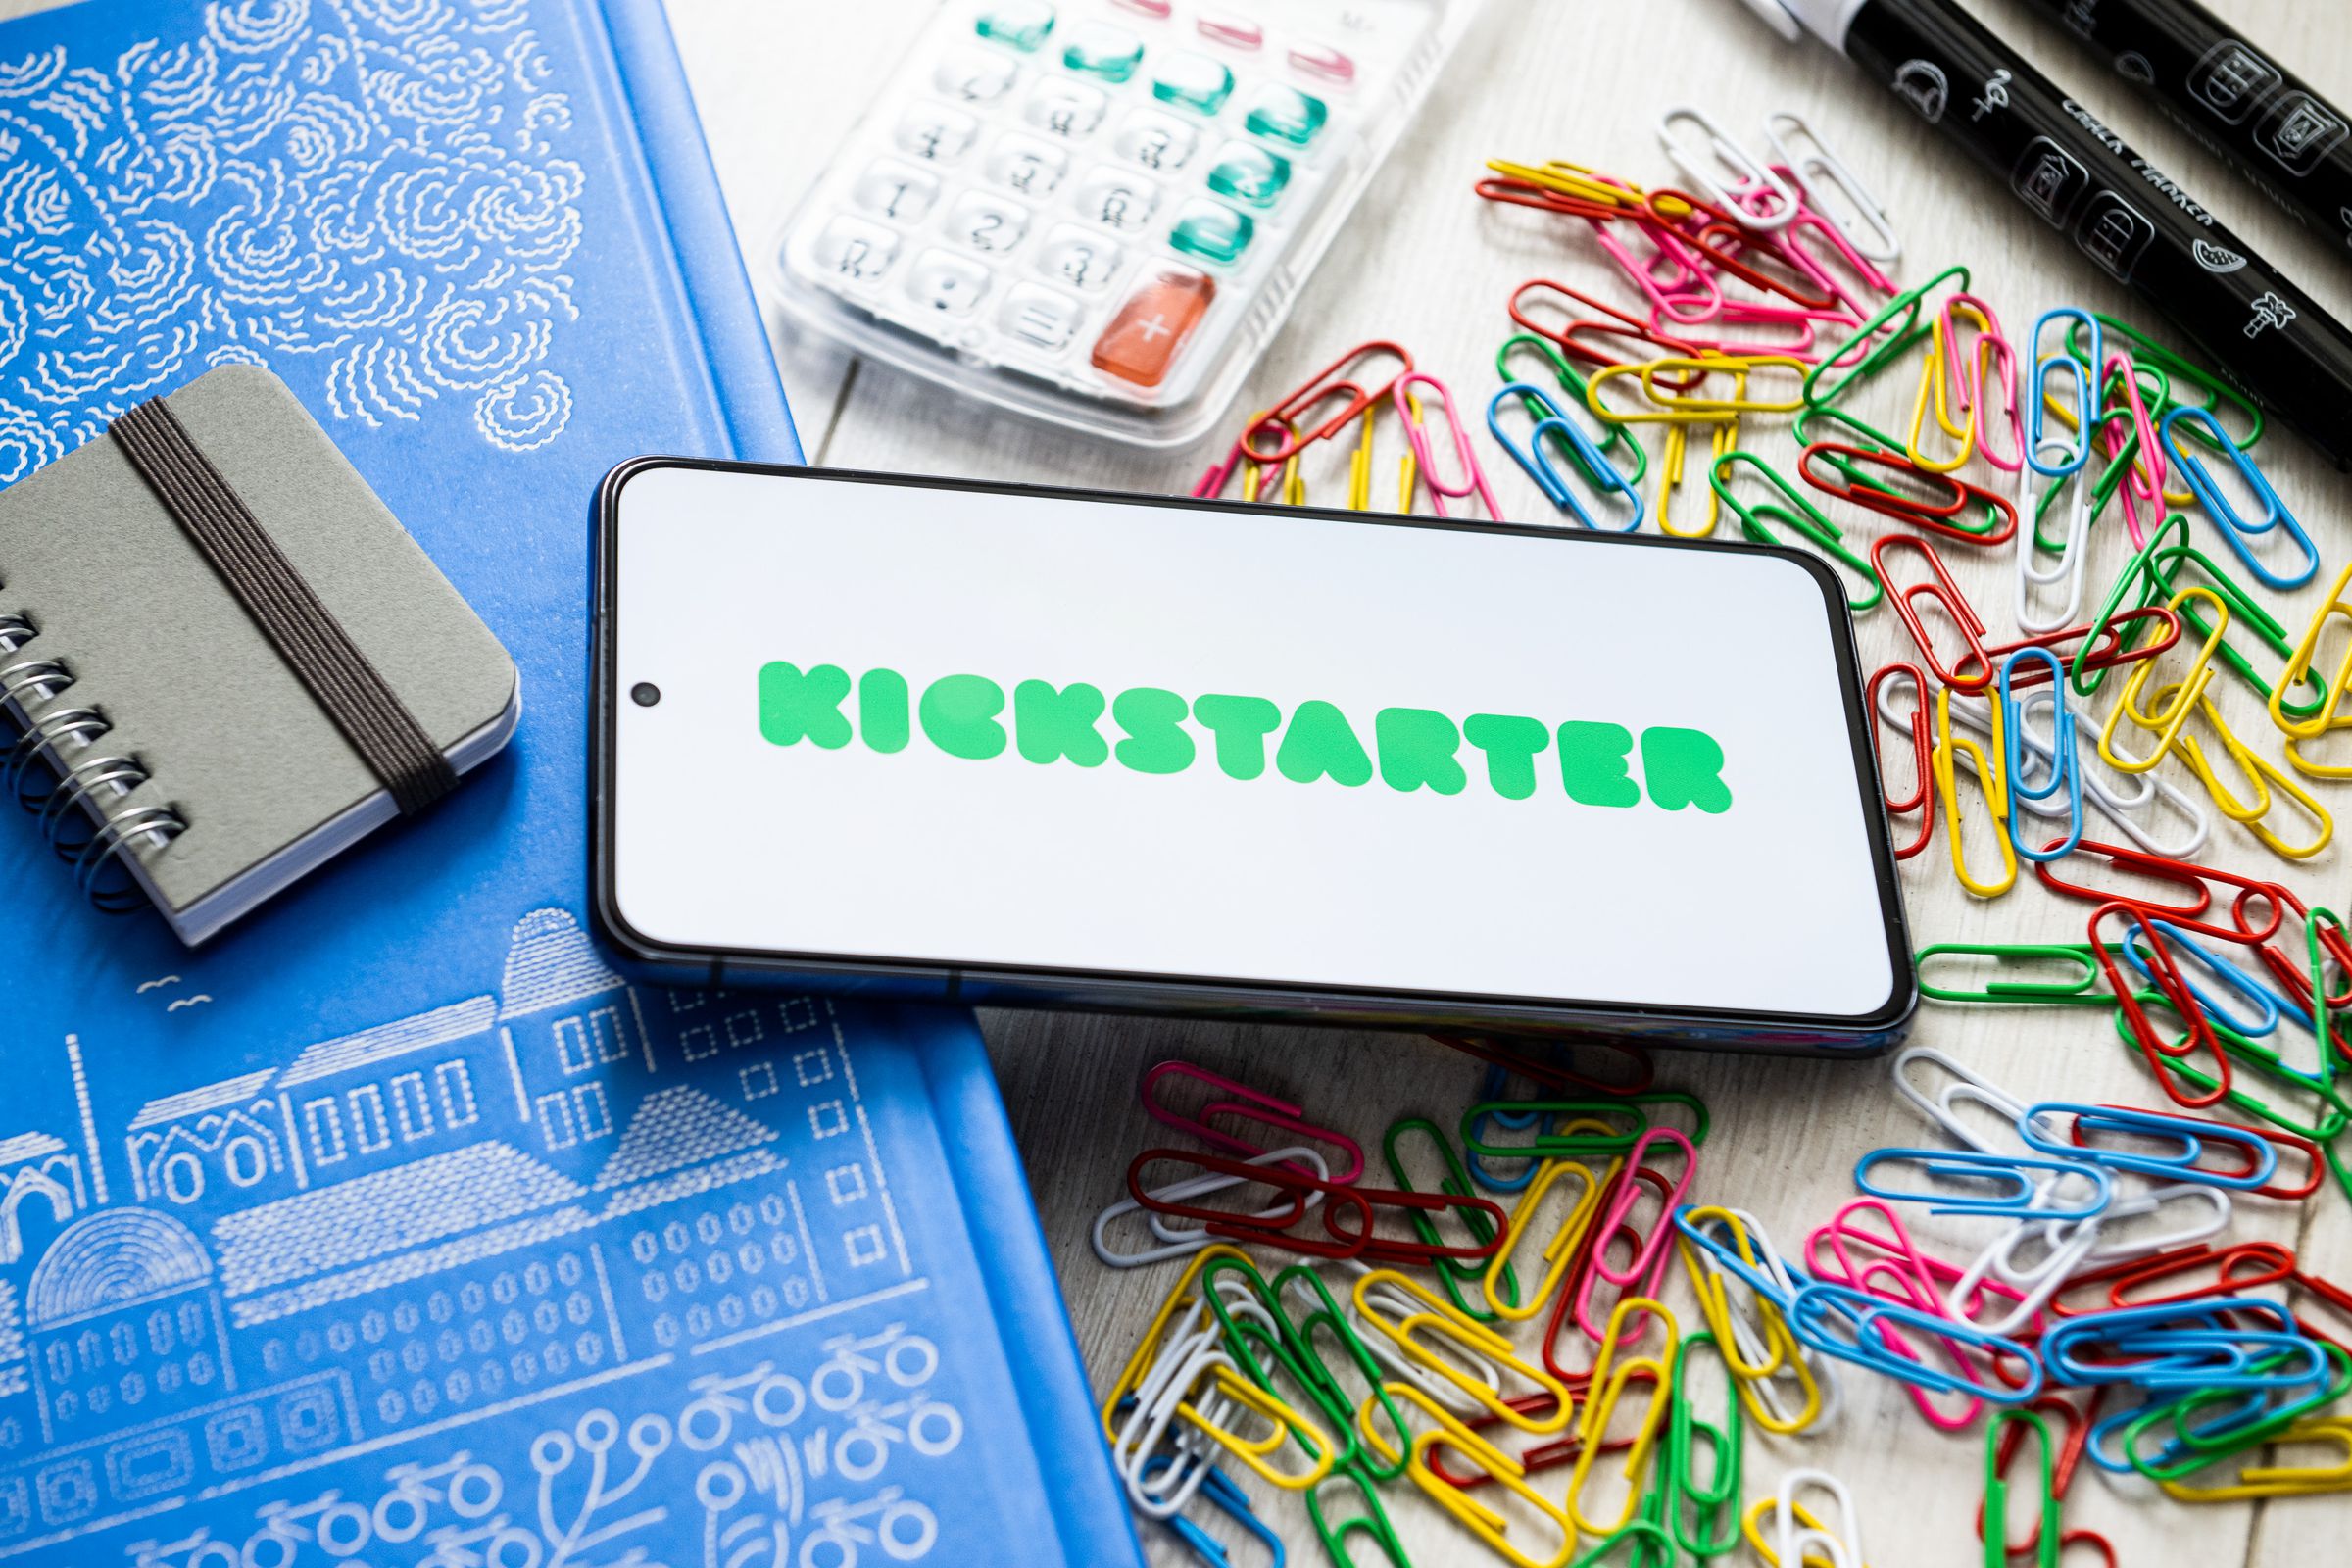 Kickstarter is adding the ability to collect money indefinitely